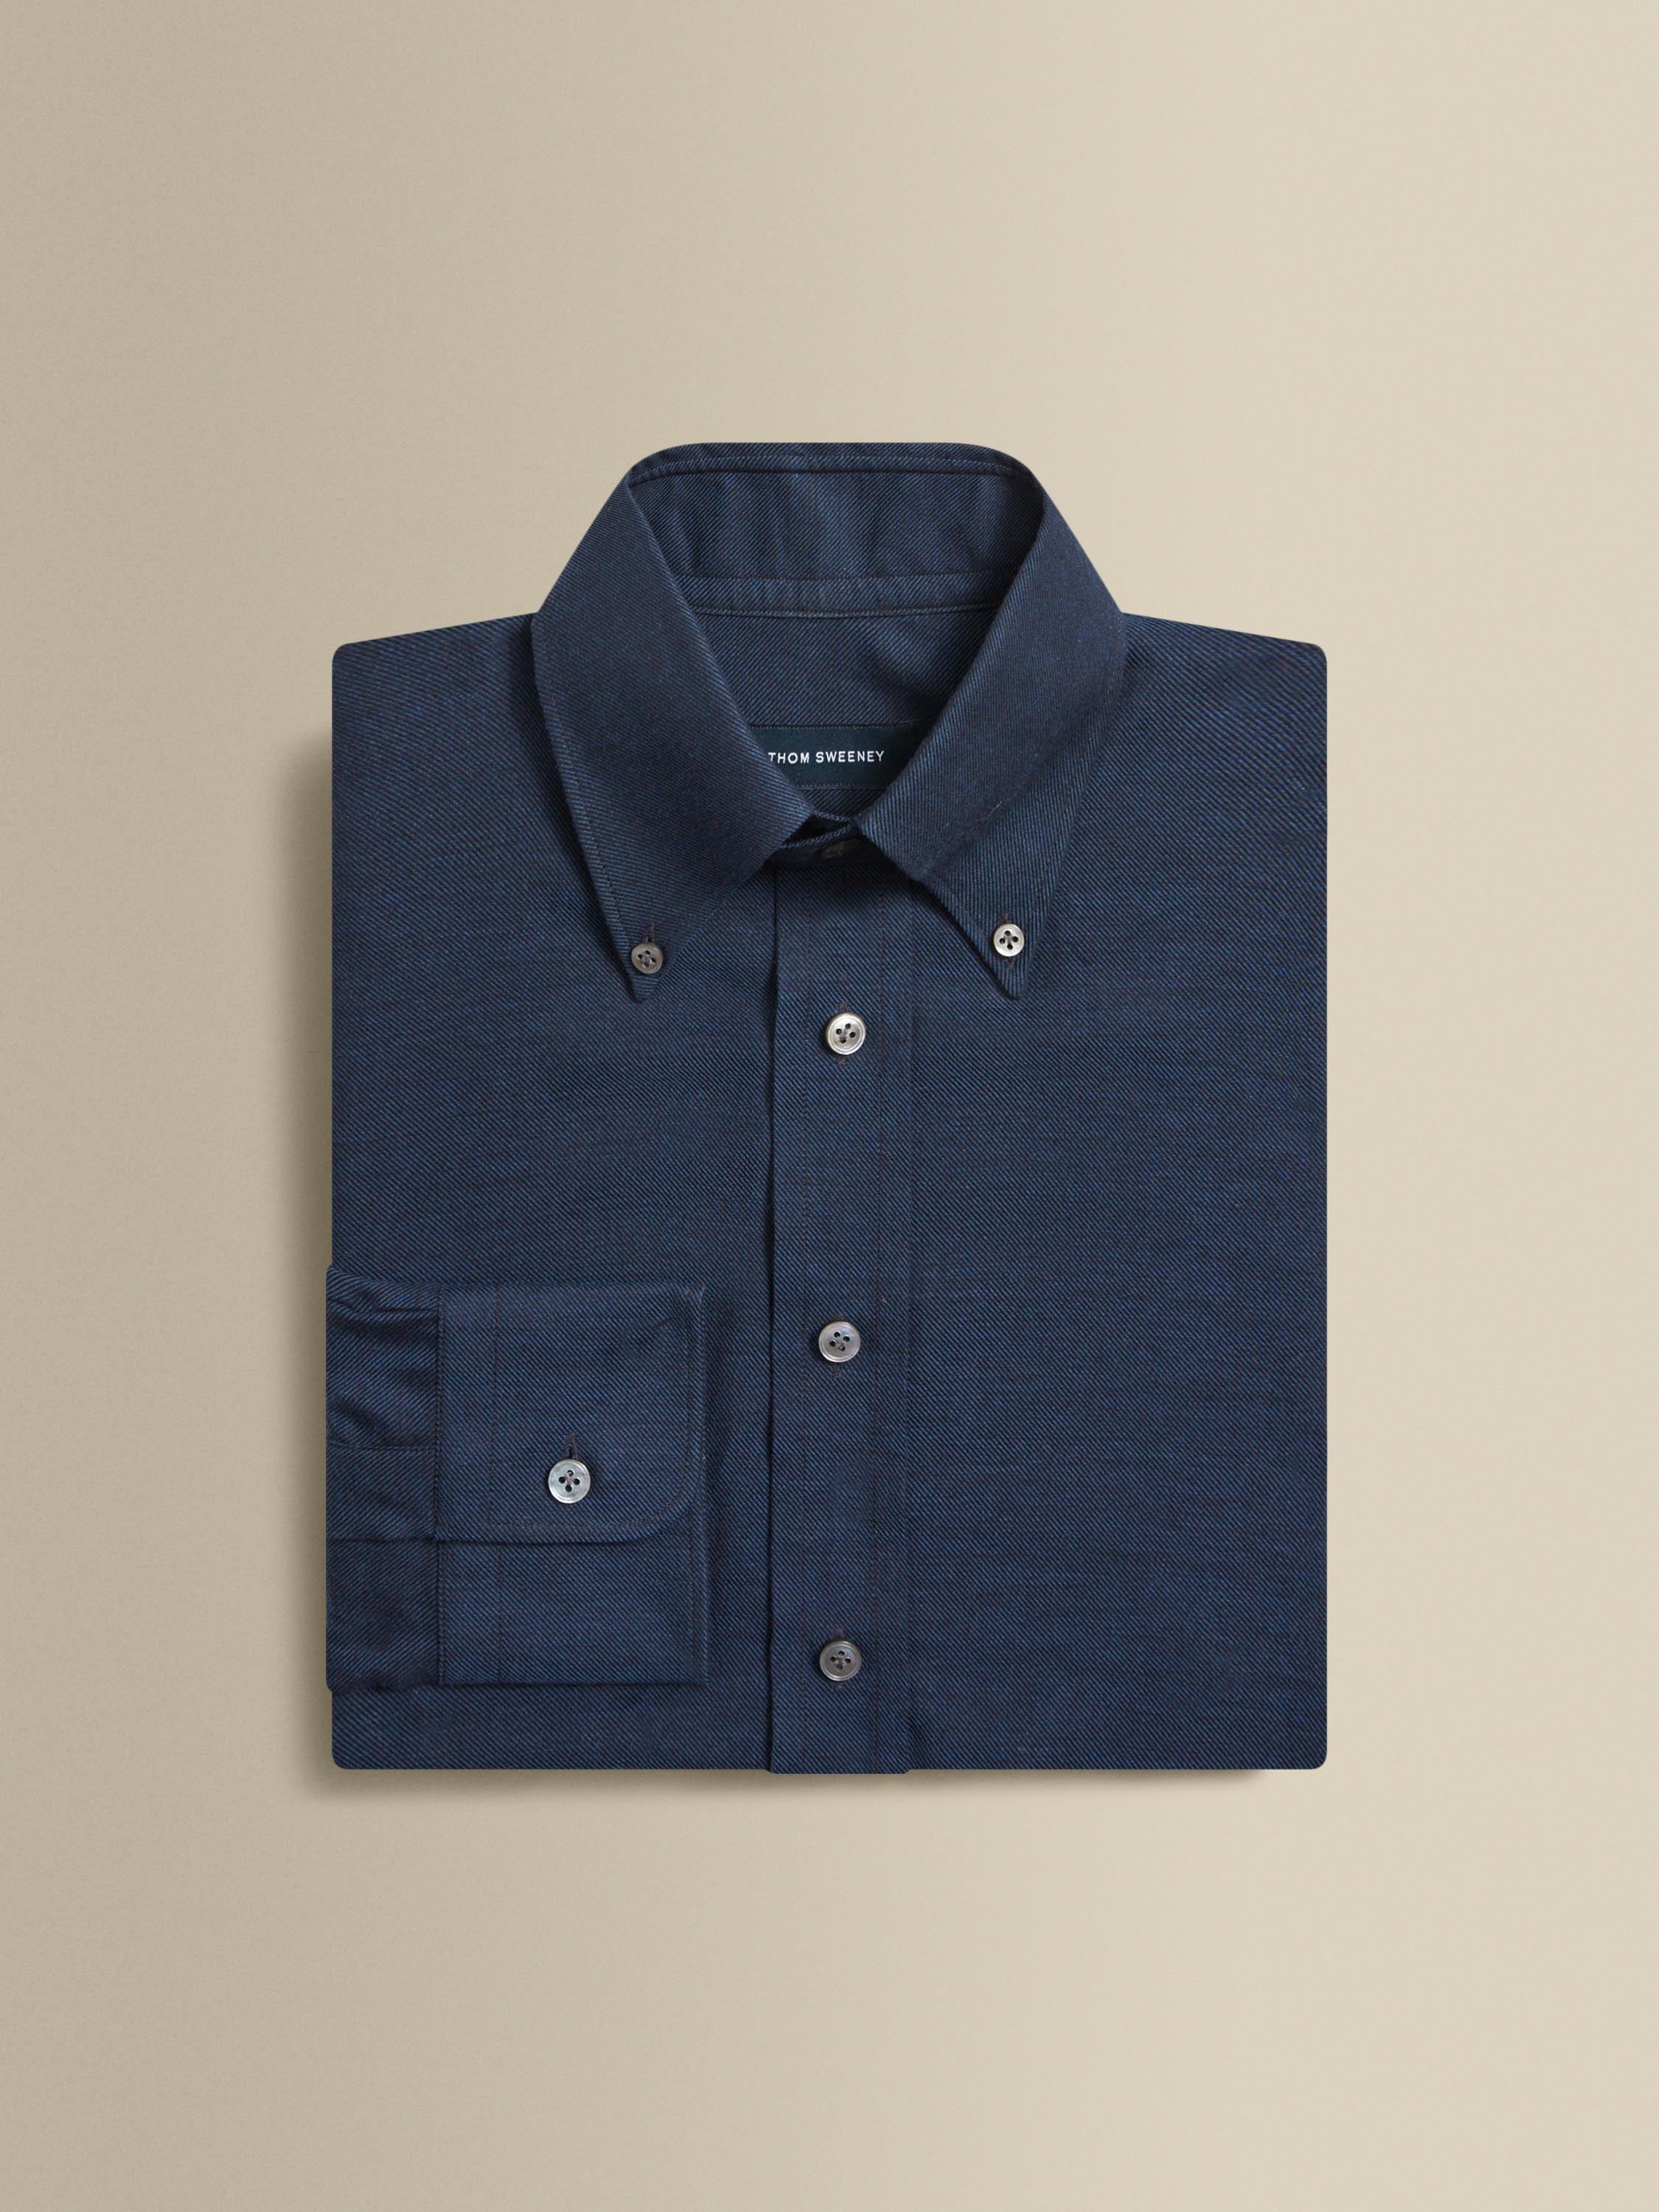 Cotton Cashmere Casual Button Down Oxford Shirt Navy Product Image